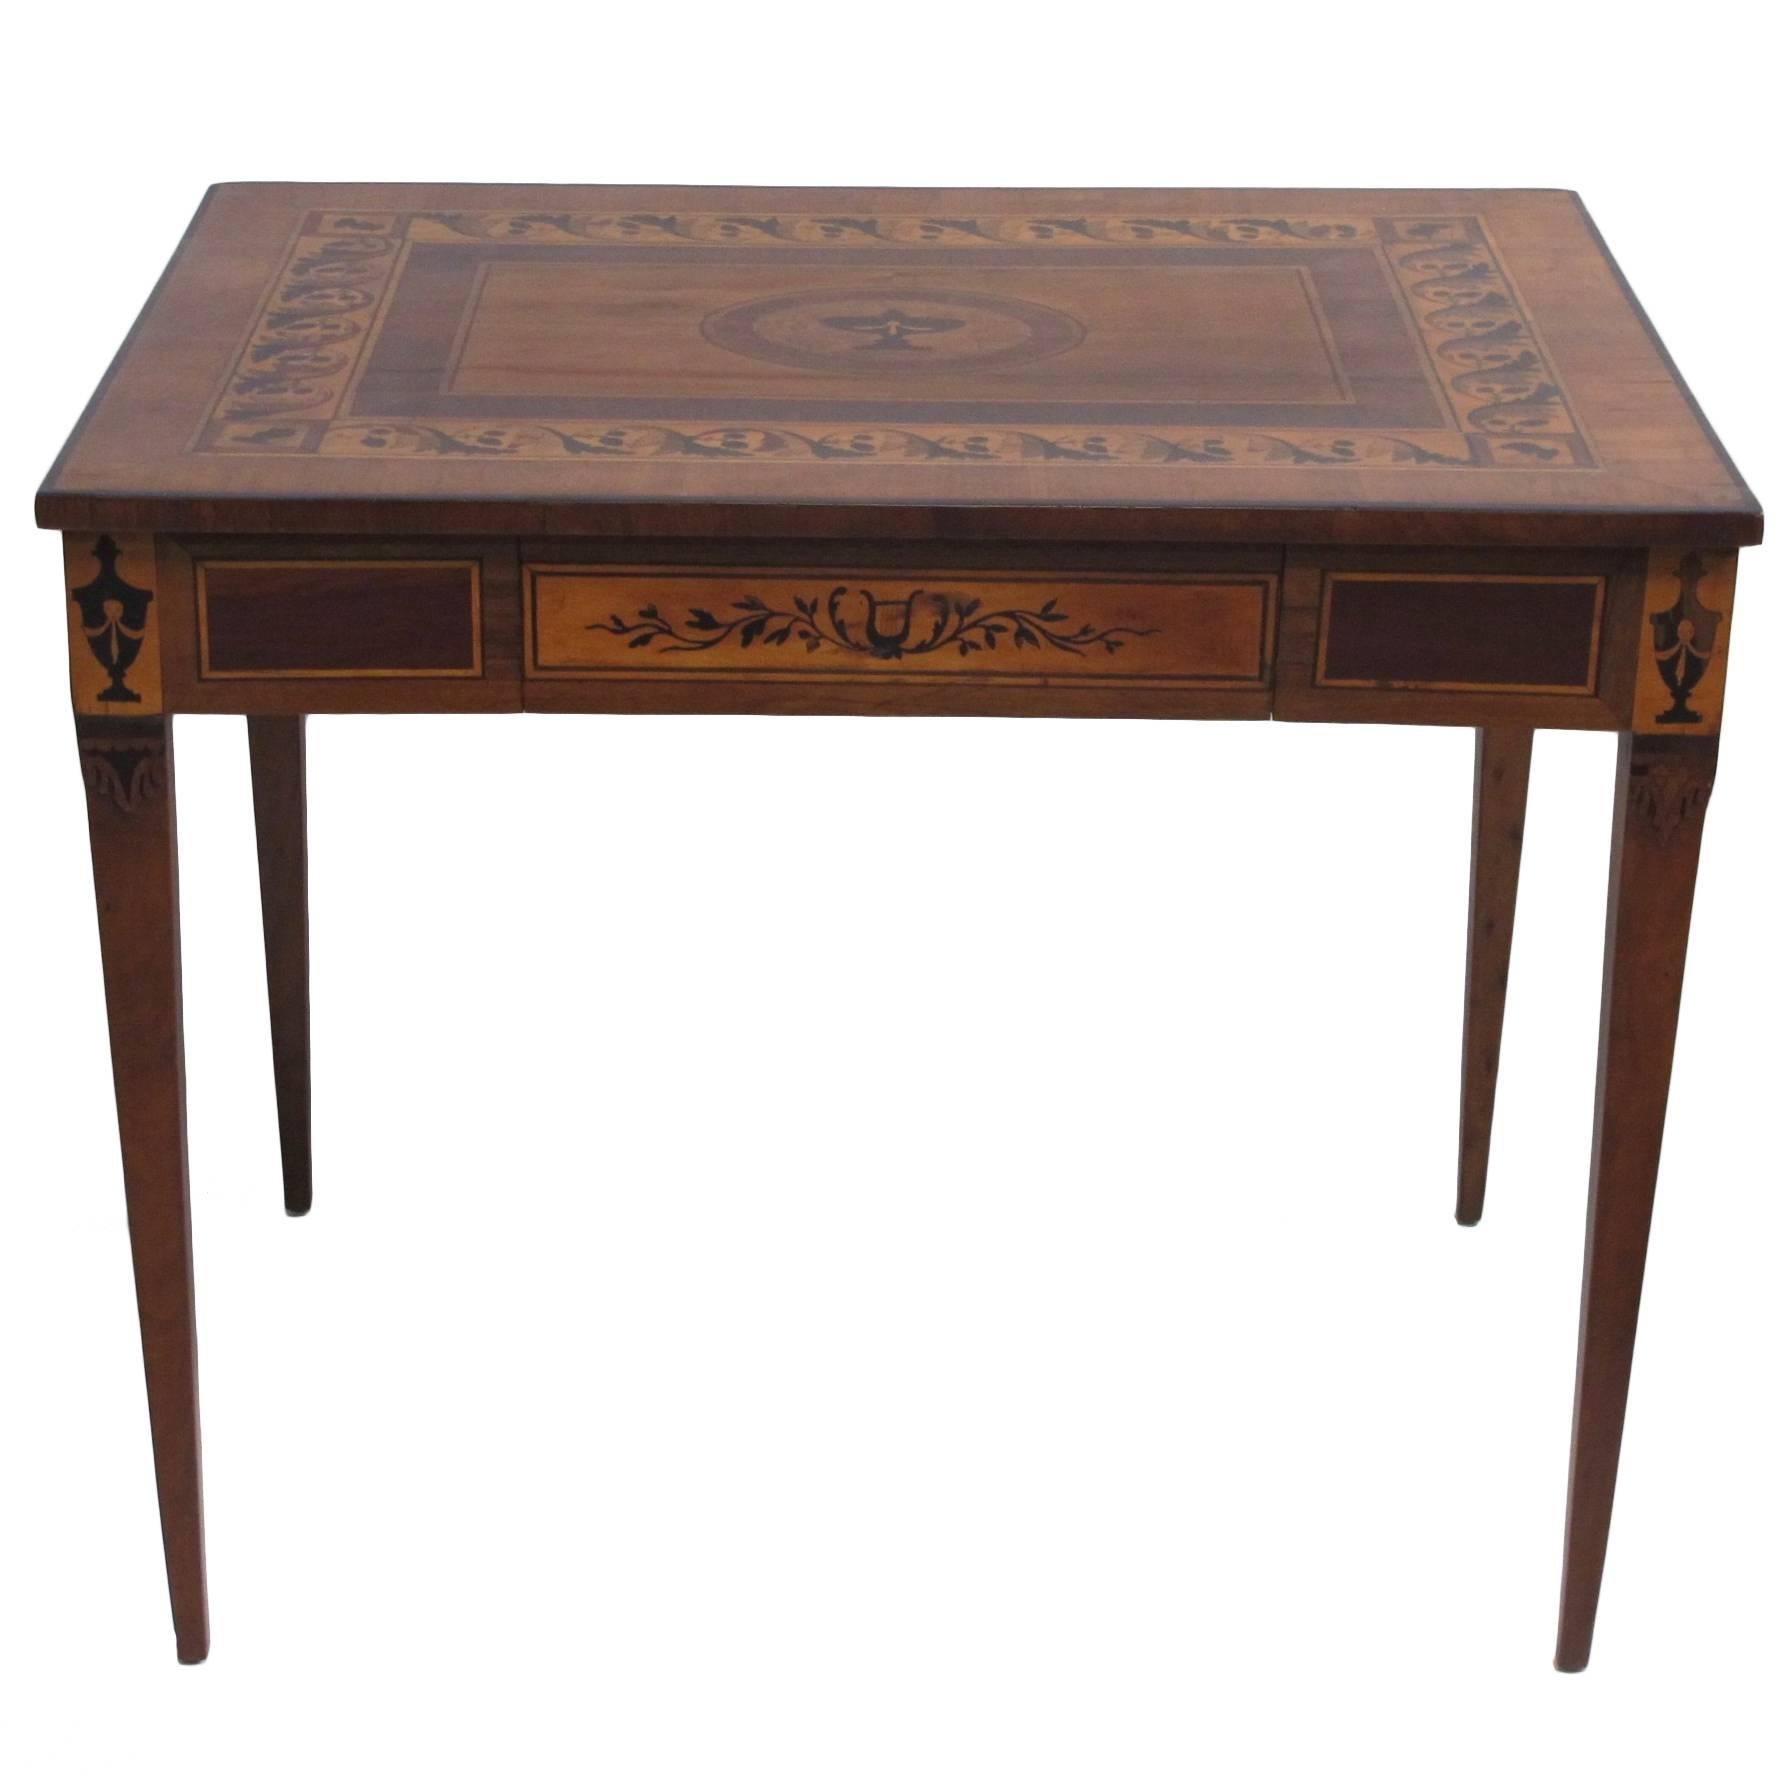  Italian Parquetry Inlaid Writing Table Desk, 18th Century